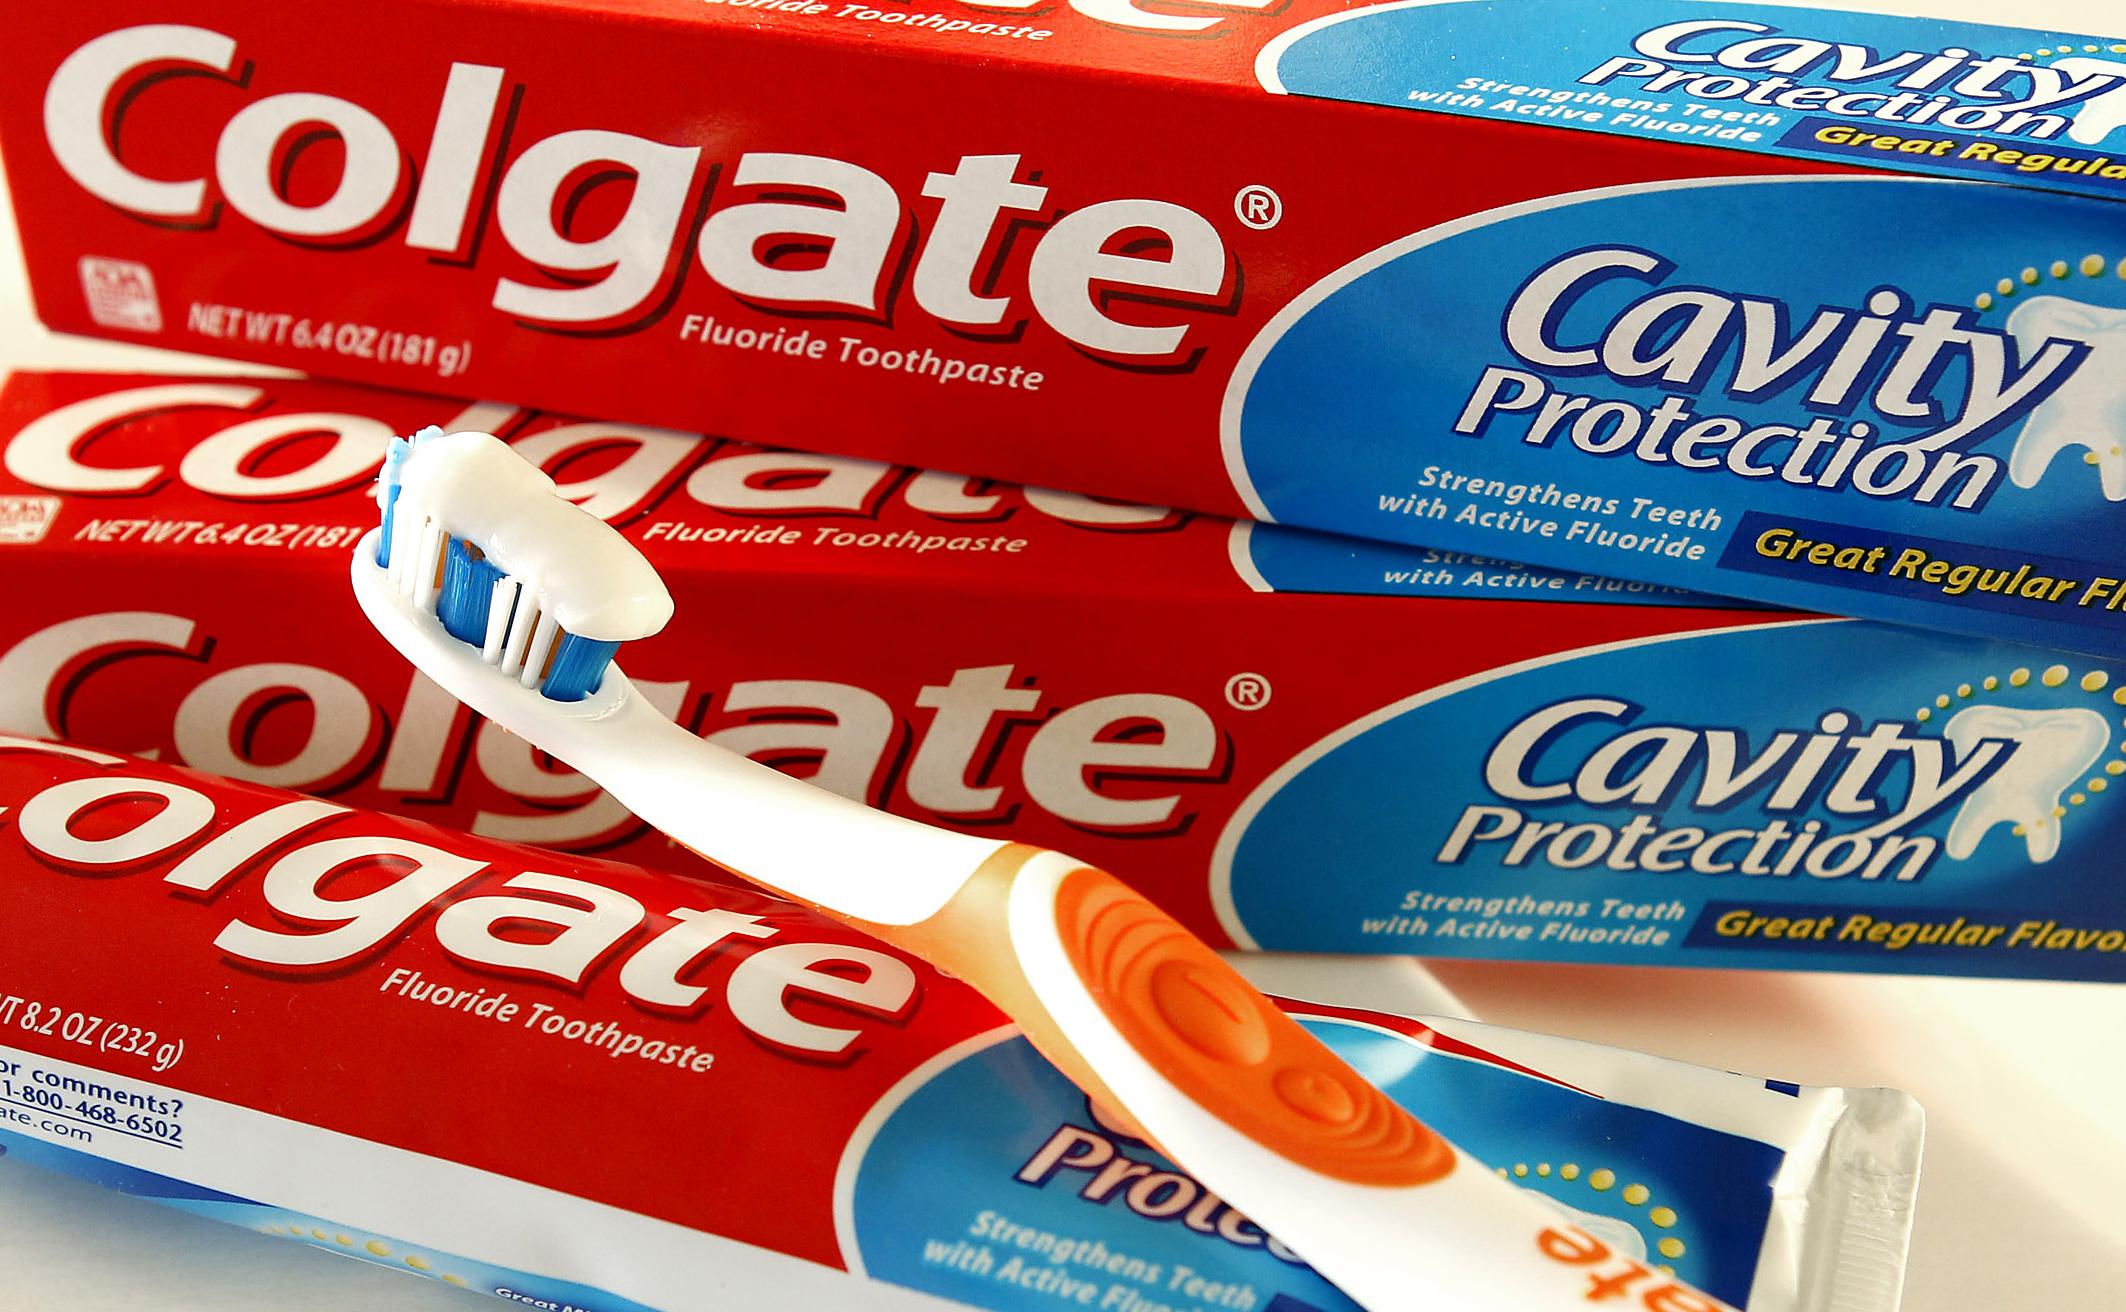 colgate-palmolive-shares-fall-on-sales-growth-concerns-the-spokesman-review